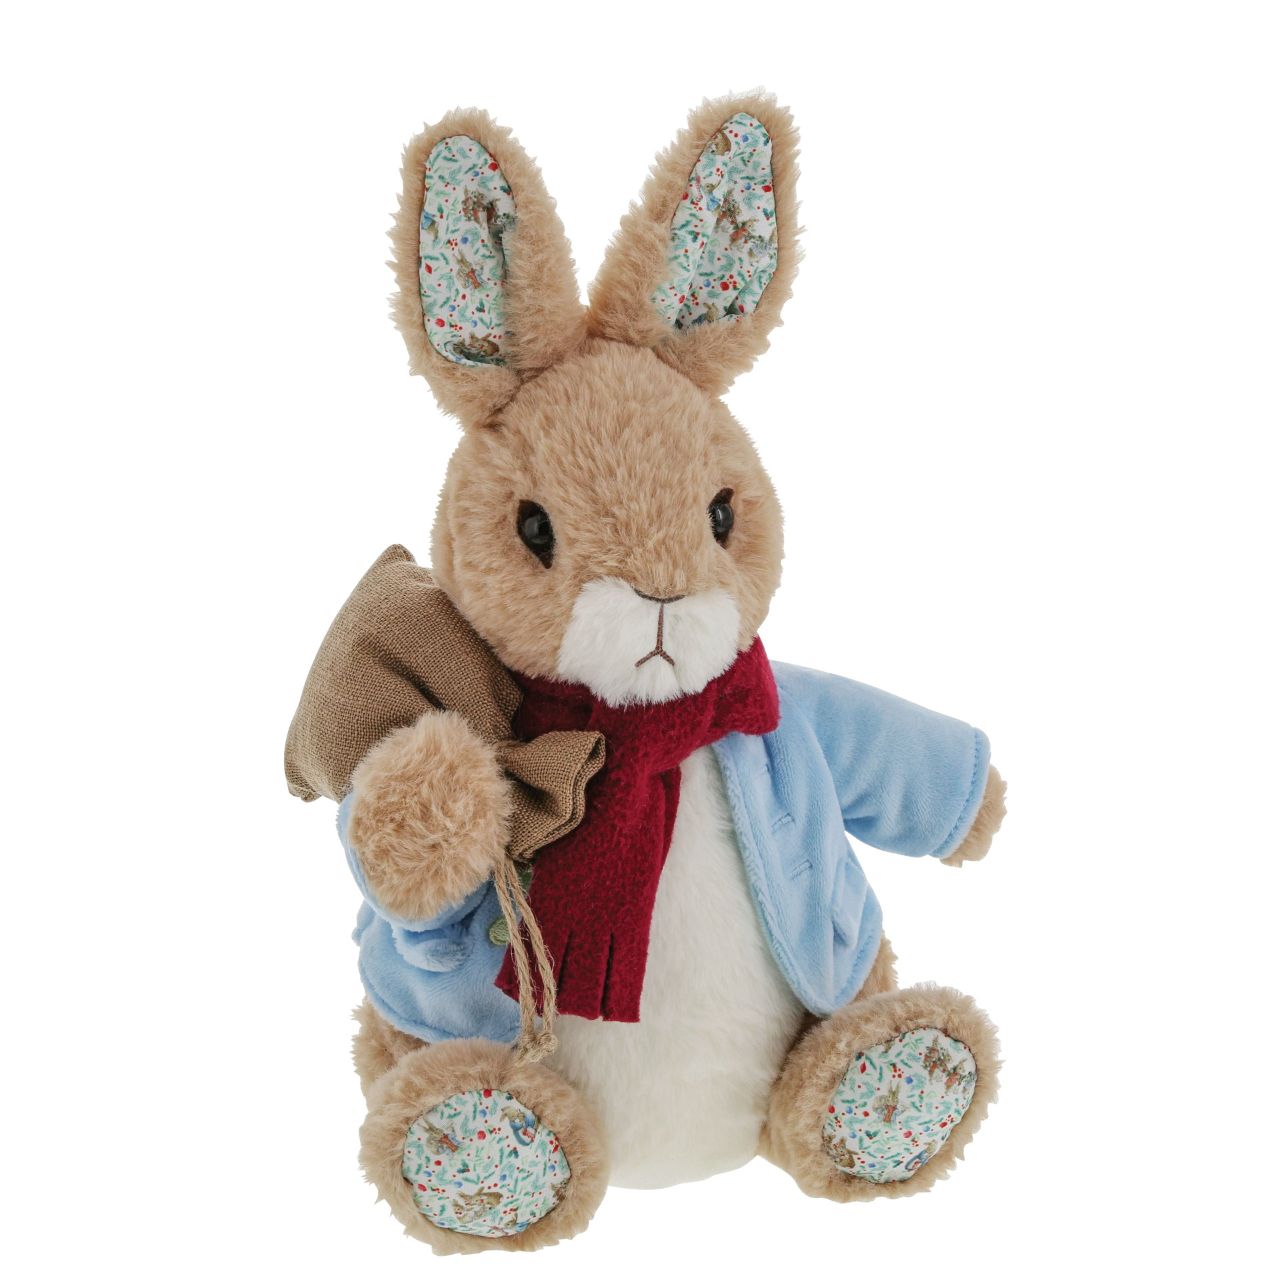 Peter Rabbit Christmas Large  We've added a touch of Christmas sparkle to our Peter Rabbit soft you. This Peter Rabbit will make the perfect keepsake for anyone who loves Christmas and the festivities it brings. A gift that isn't just for little ones, but for grownups too.